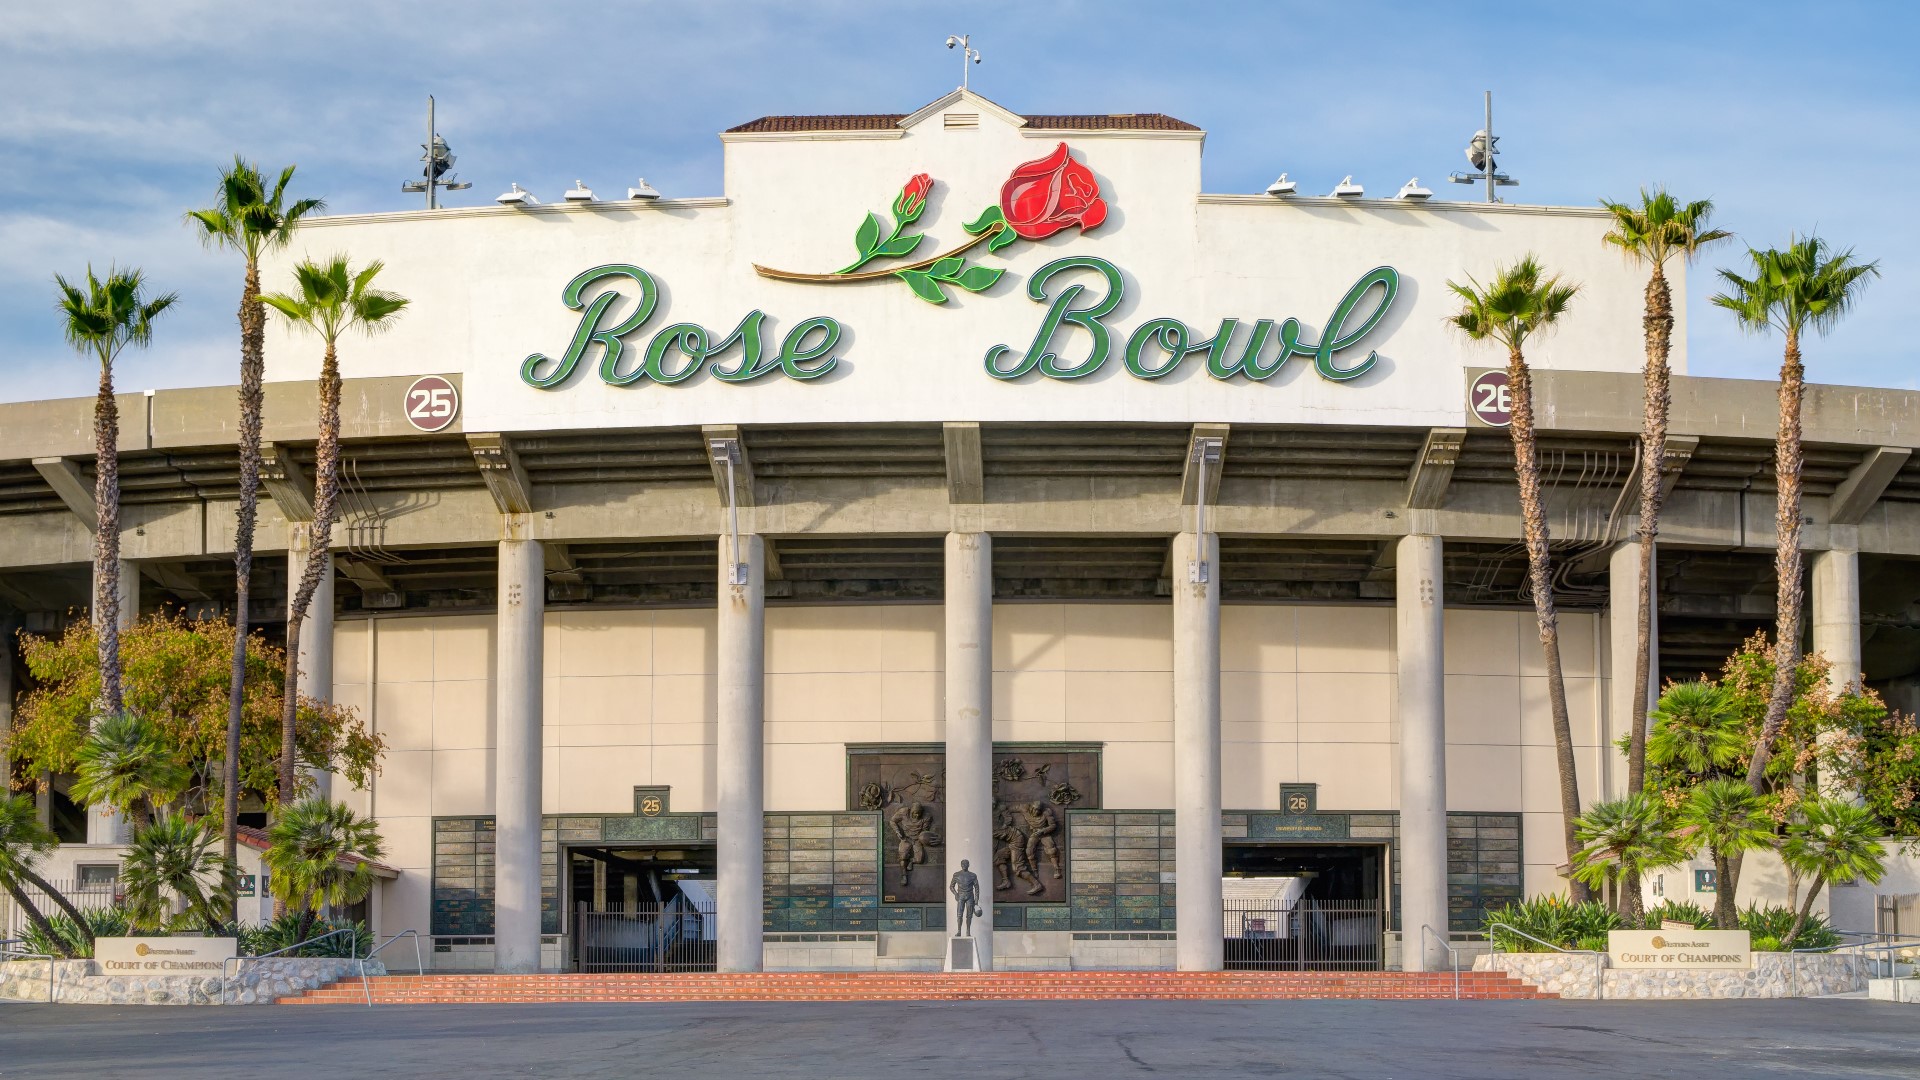 Penn State hasn't made an appearance in the Rose Bowl since 2016.